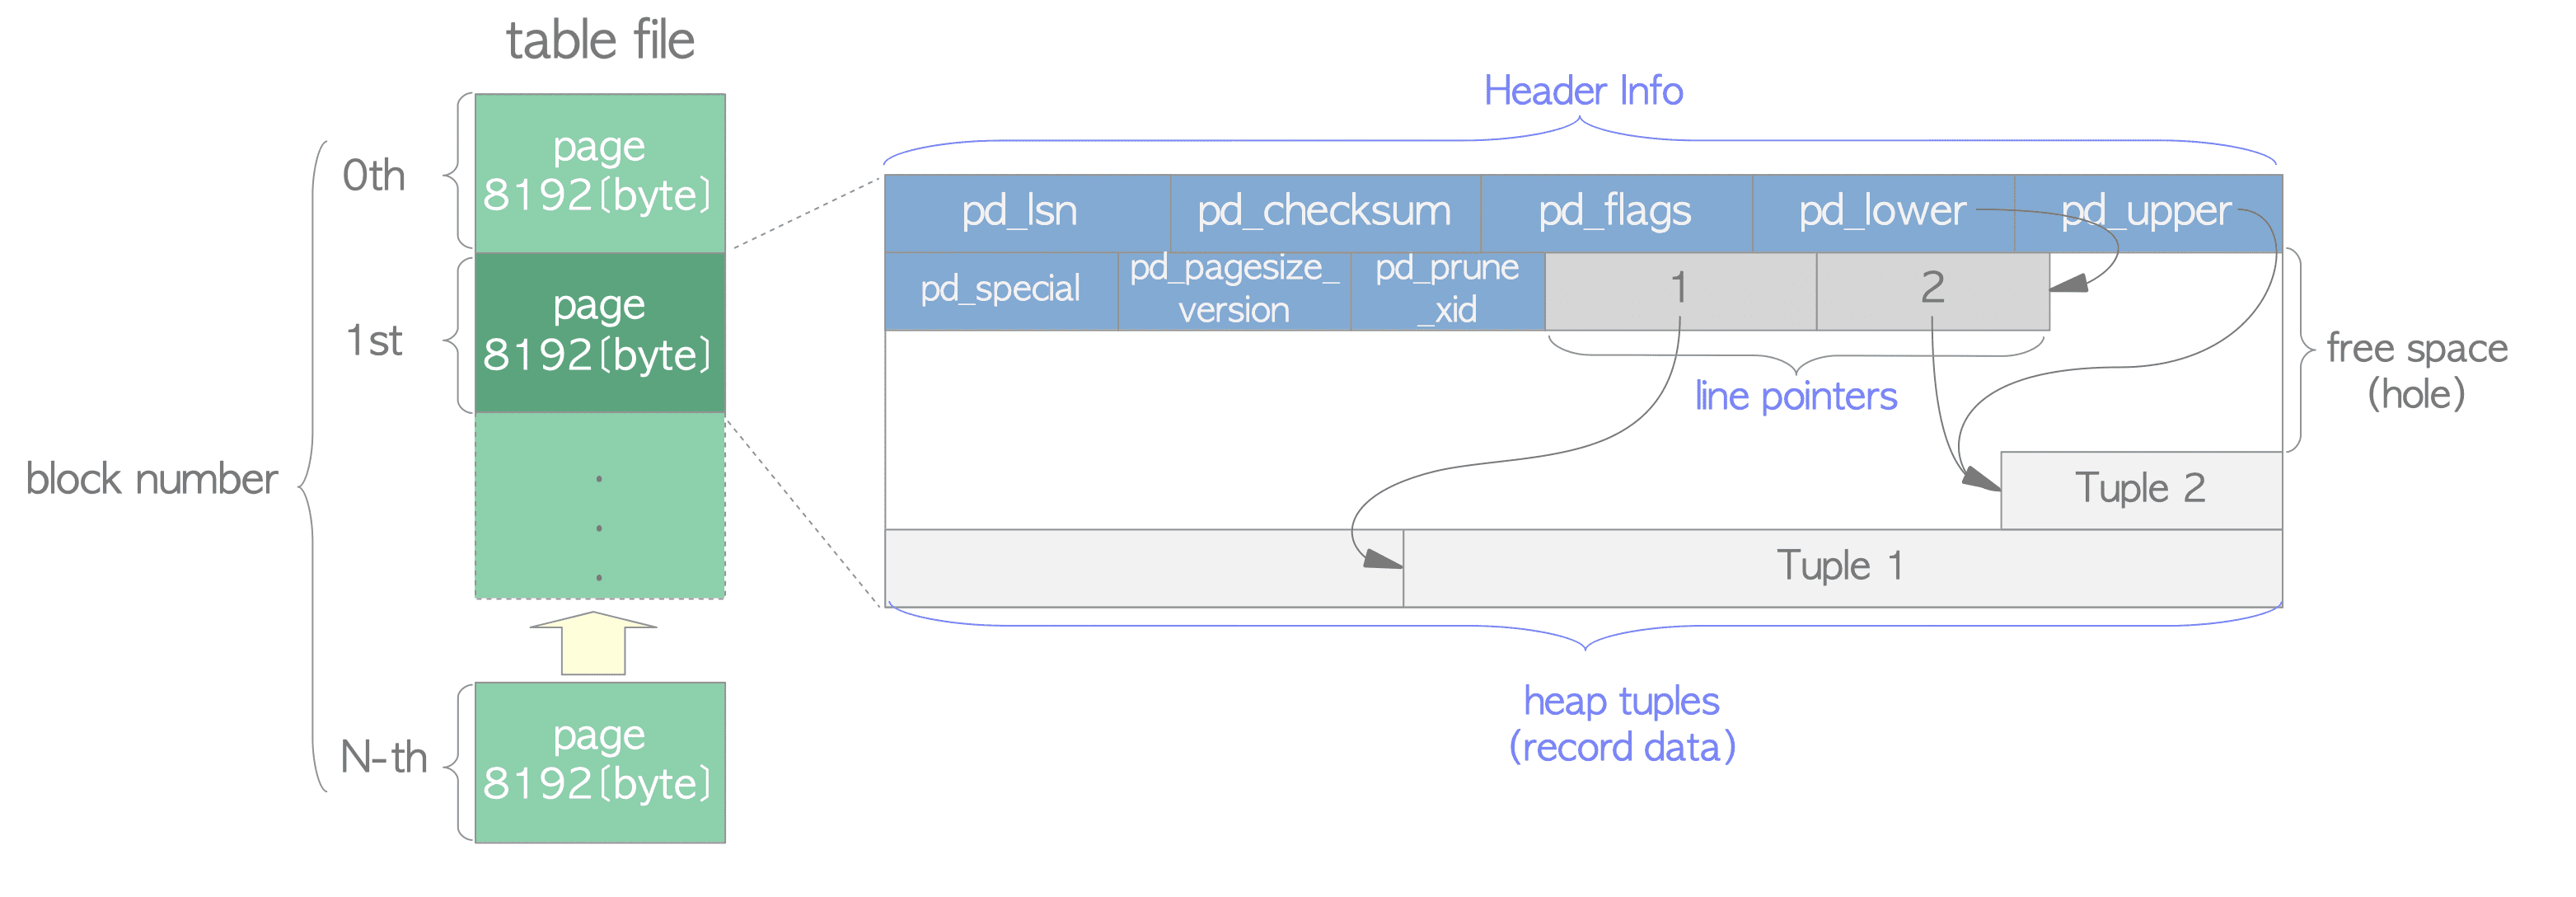 Page layout of a heap table file